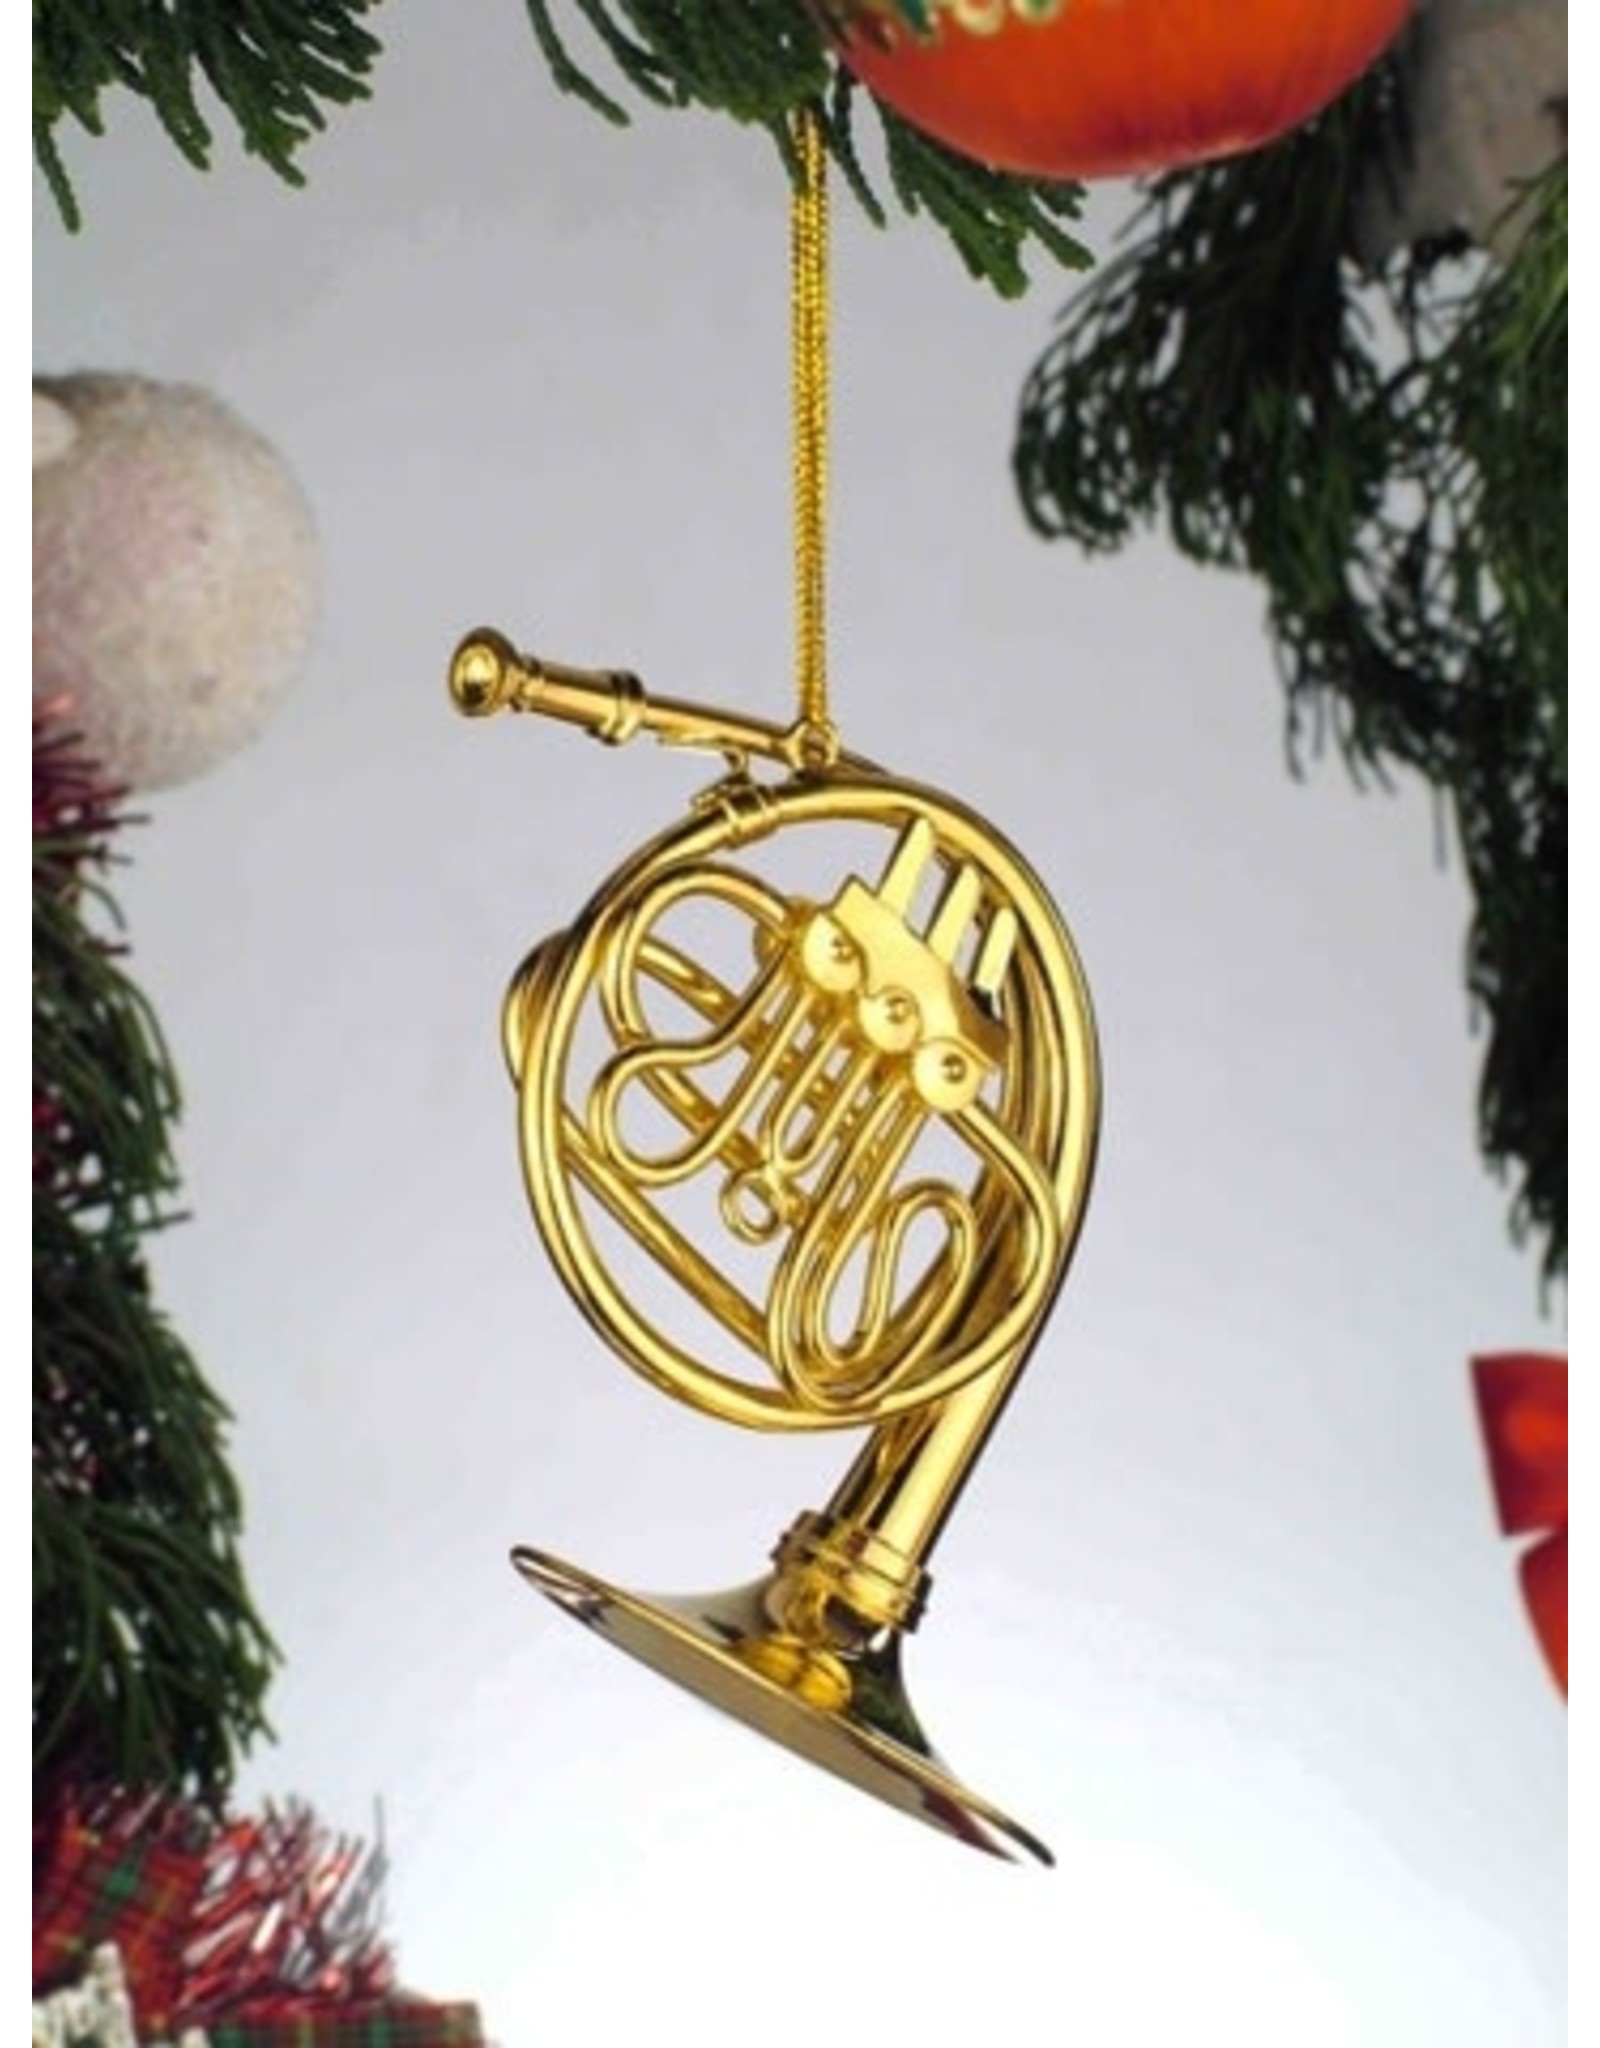 Broadway Gift Co French Horn